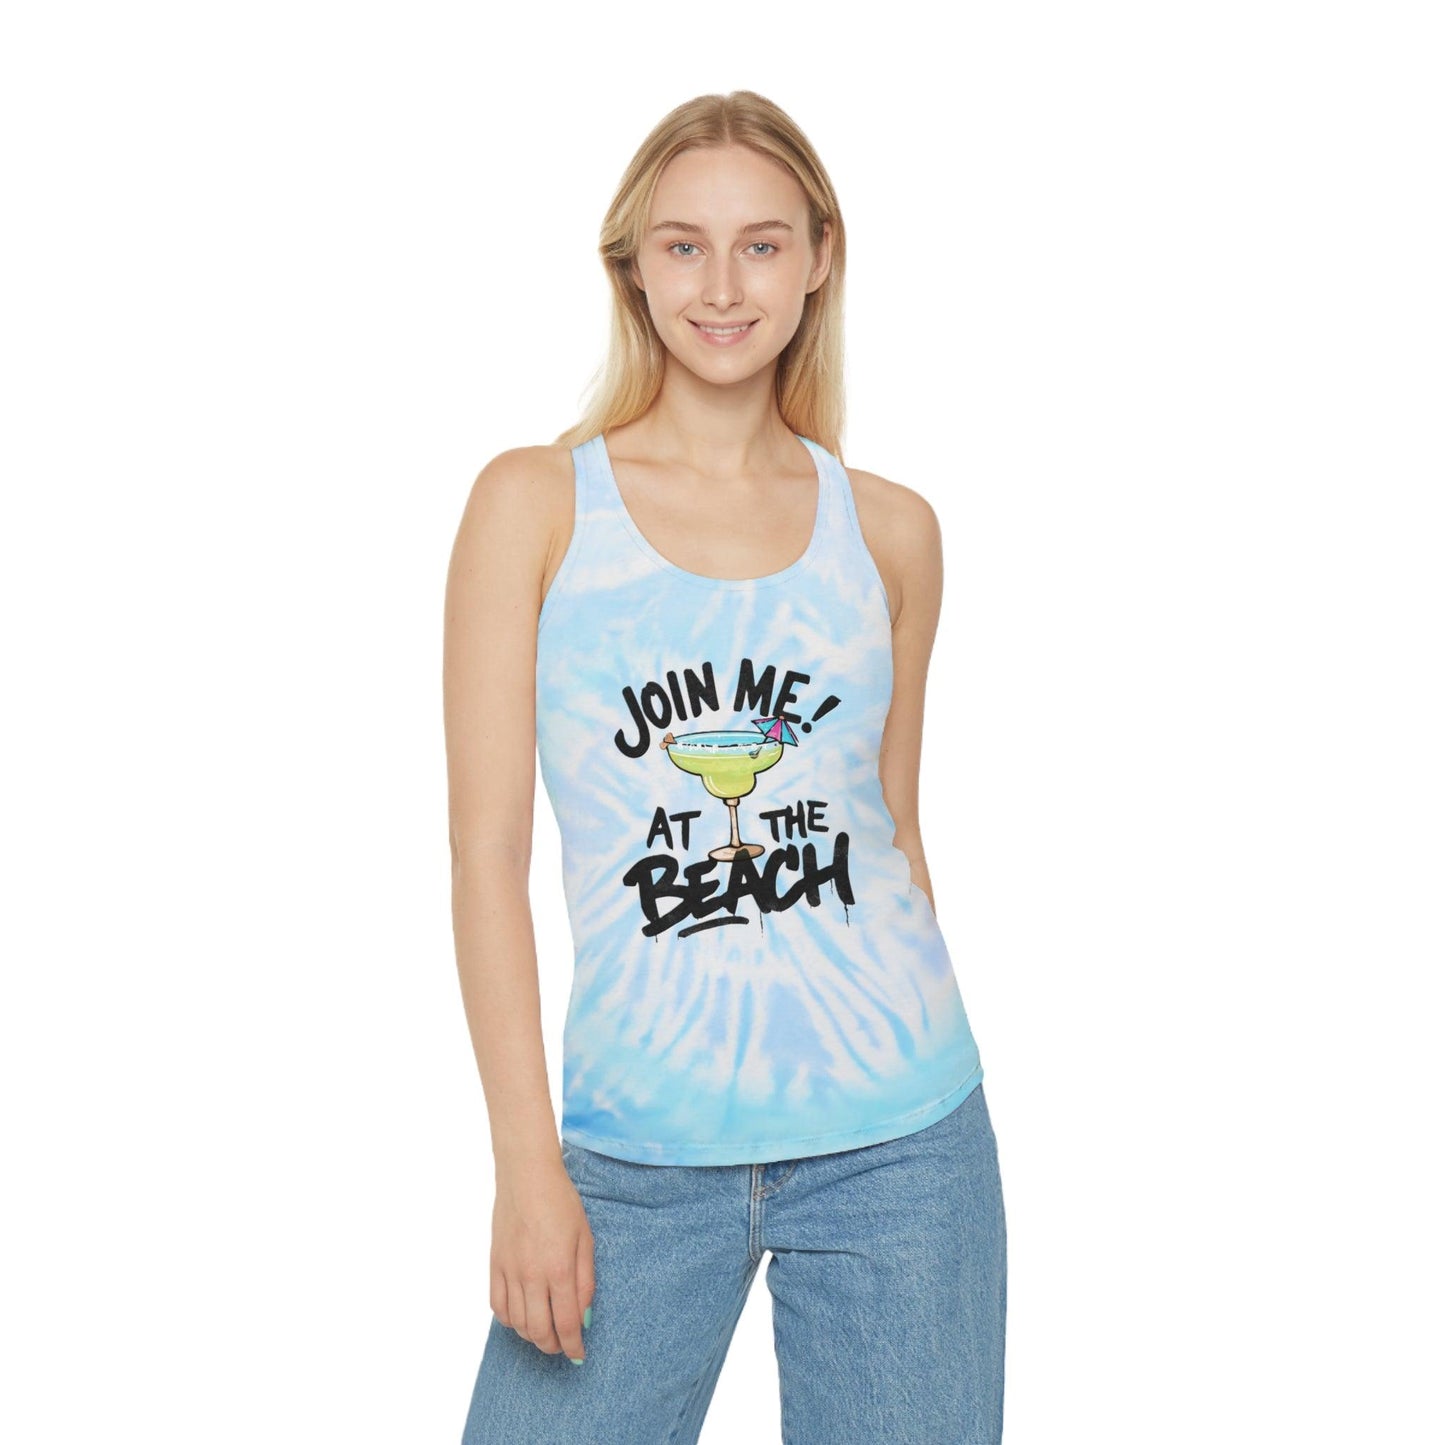 Join Me at the Beach Margarita Tie Dye Racerback Tank Top - Coastal Collections